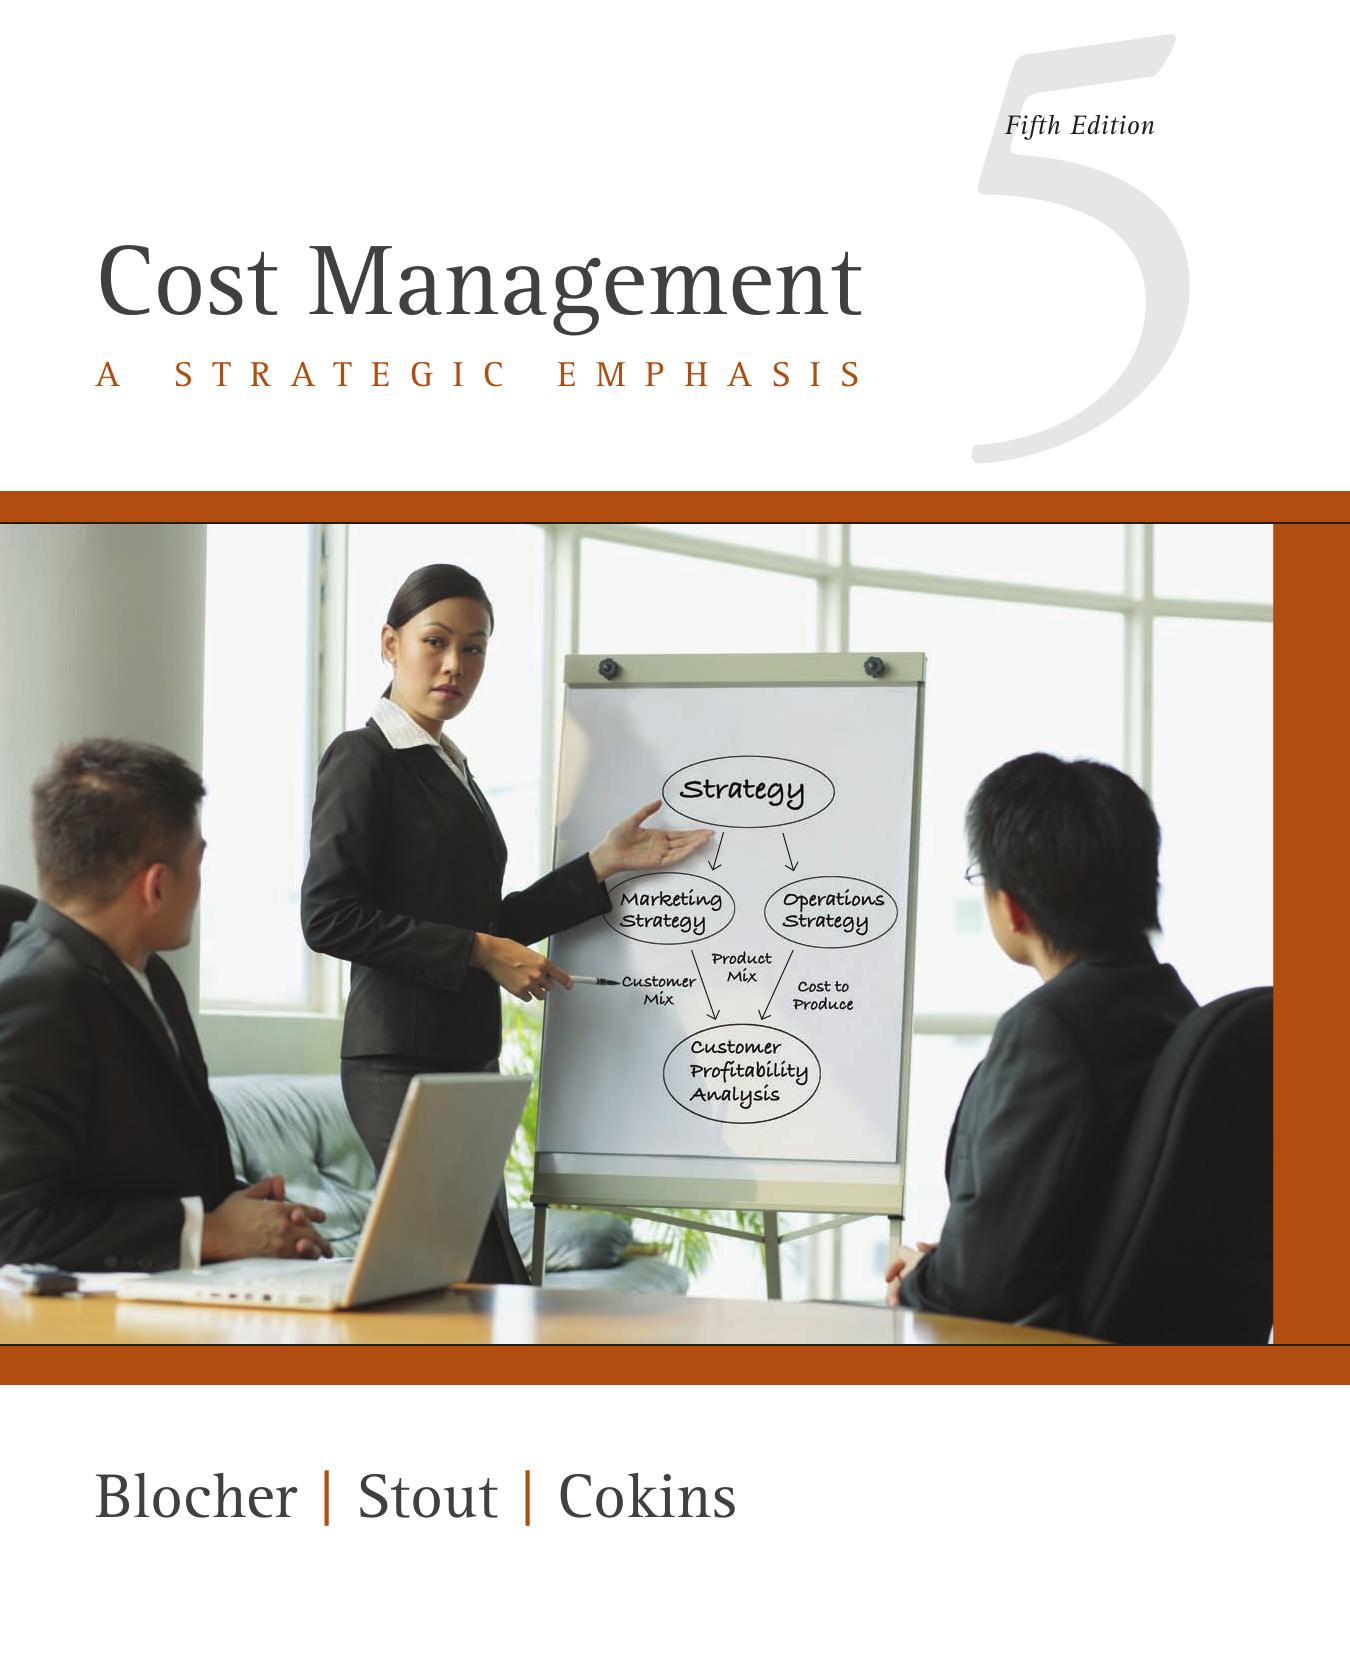 Cost Management-A Strategic Emphasis, 5th Edition.jpg